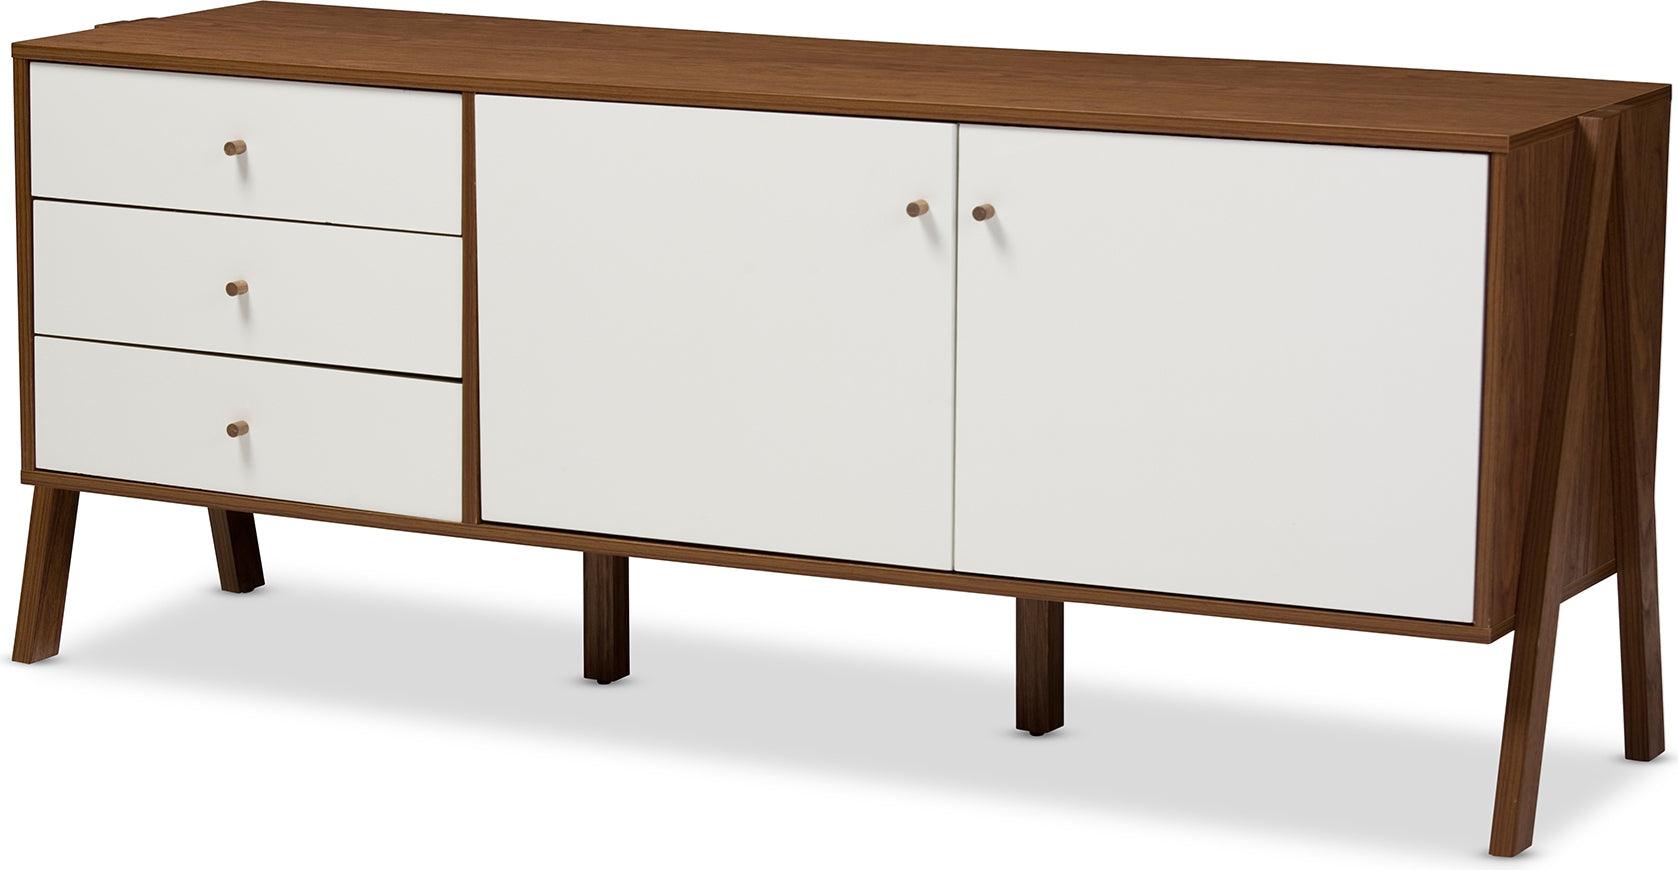 Wholesale Interiors Buffets & Sideboards - Harlow Sideboard White & Walnut